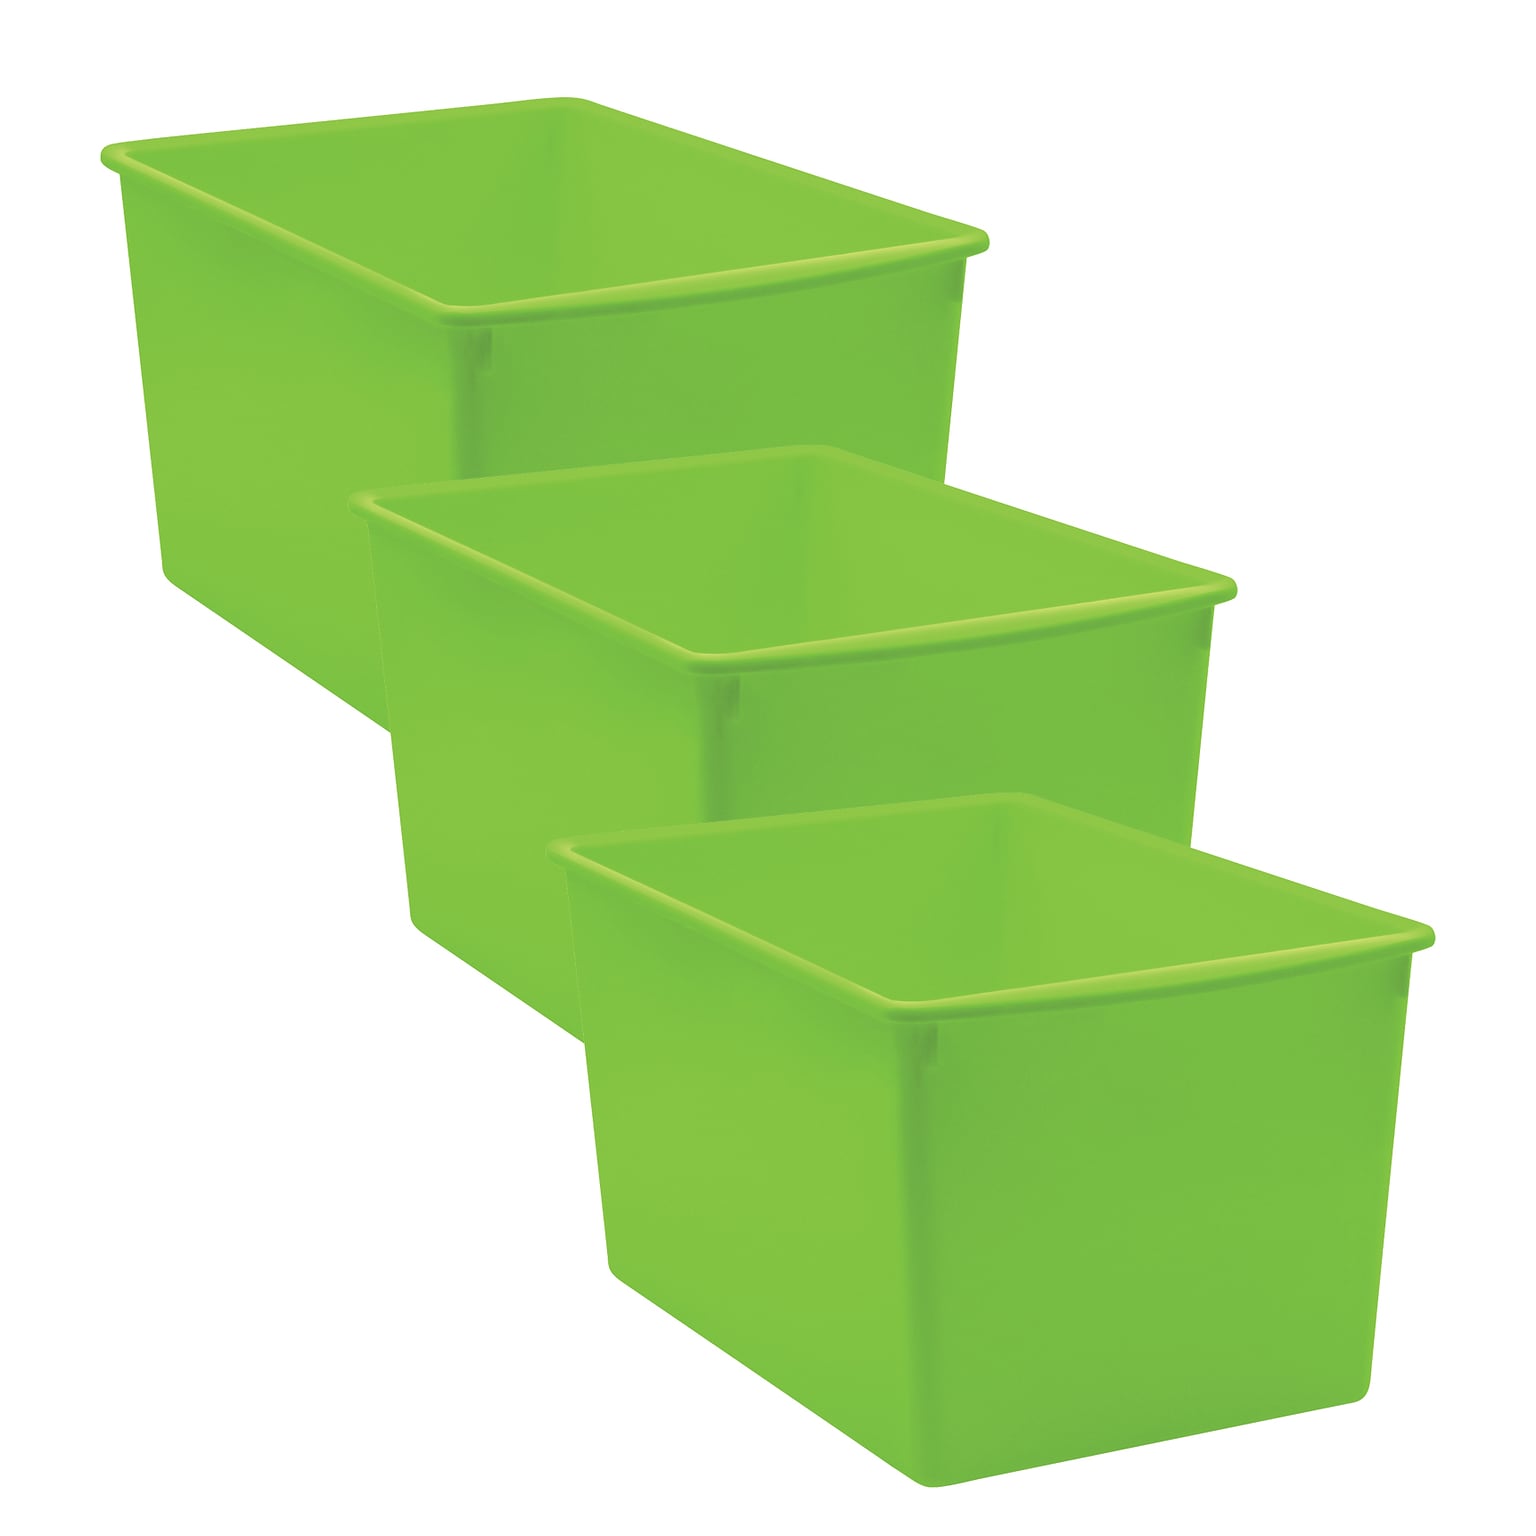 Teacher Created Resources® Plastic Multi-Purpose Bin, 14 x 9.25 x 7.5, Lime, Pack of 3 (TCR20429-3)